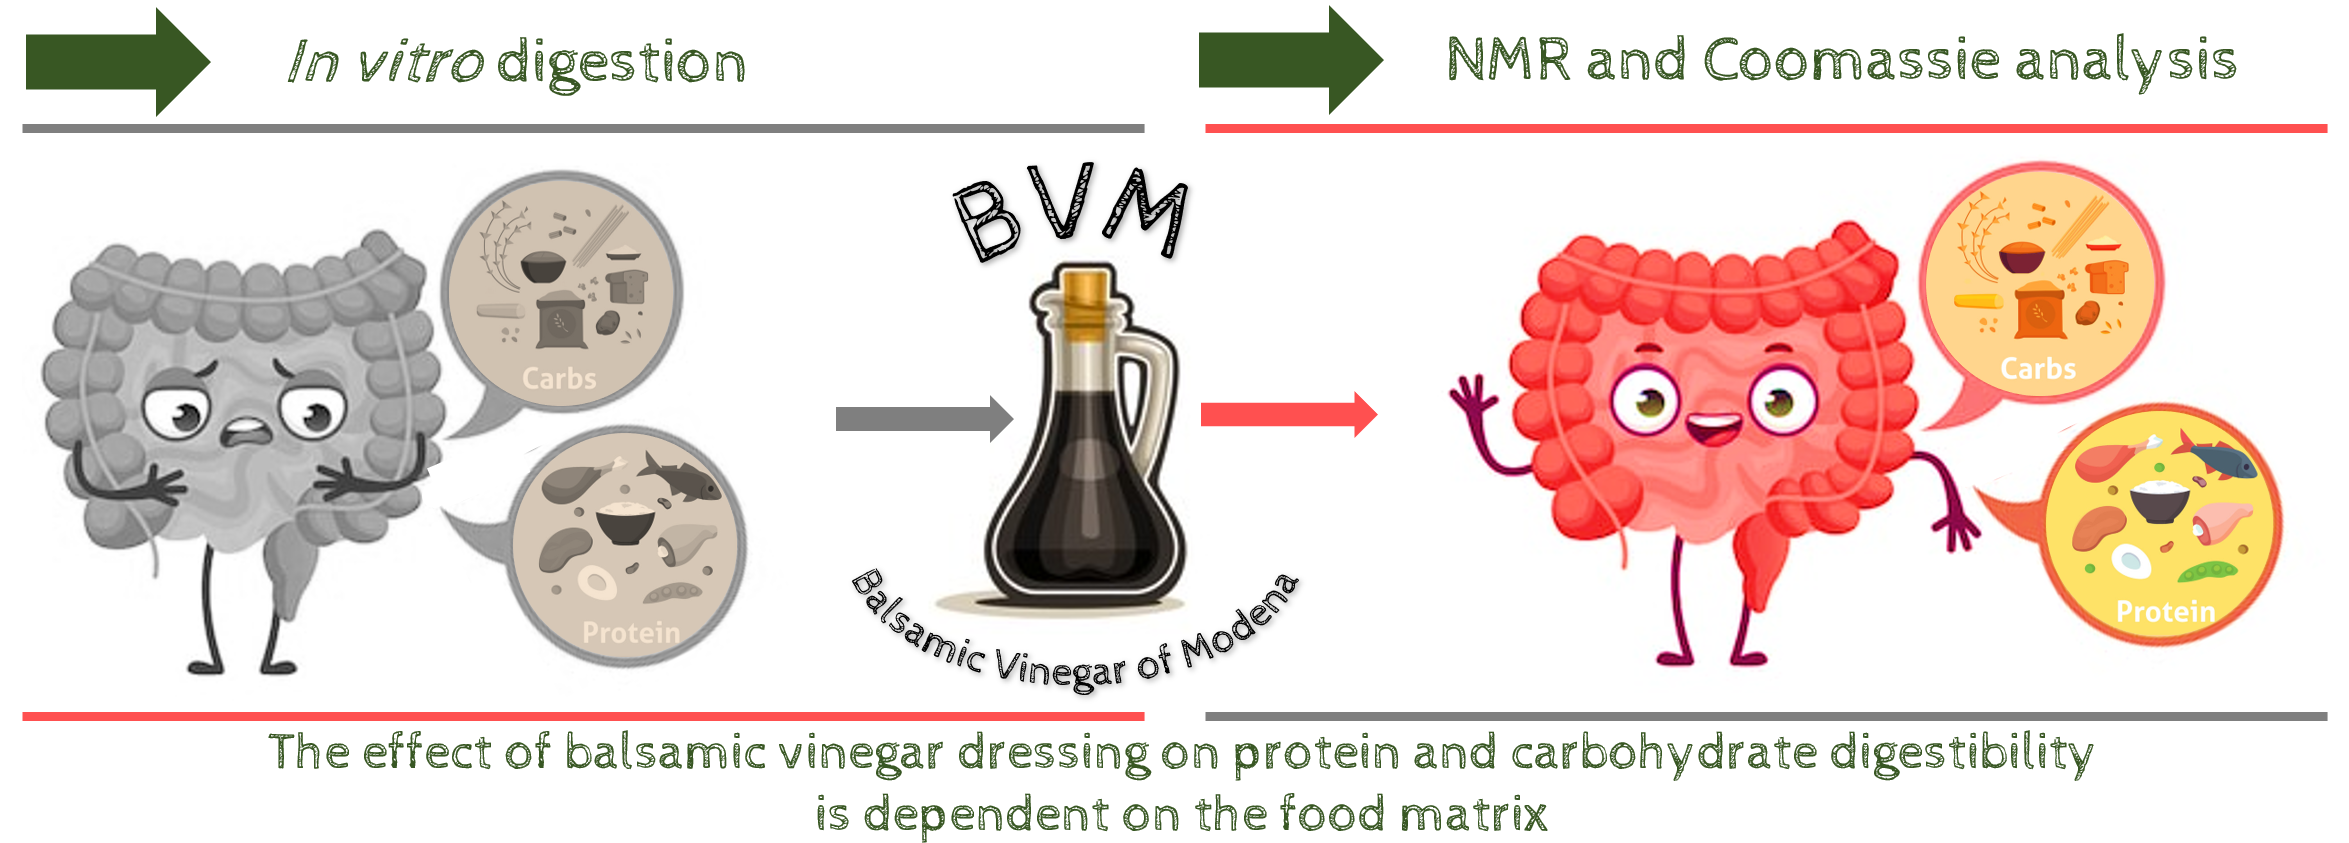 Foods | Free Full-Text | The Effect of Balsamic Vinegar Dressing on Protein and Carbohydrate Digestibility is Dependent on the Food Matrix HTML